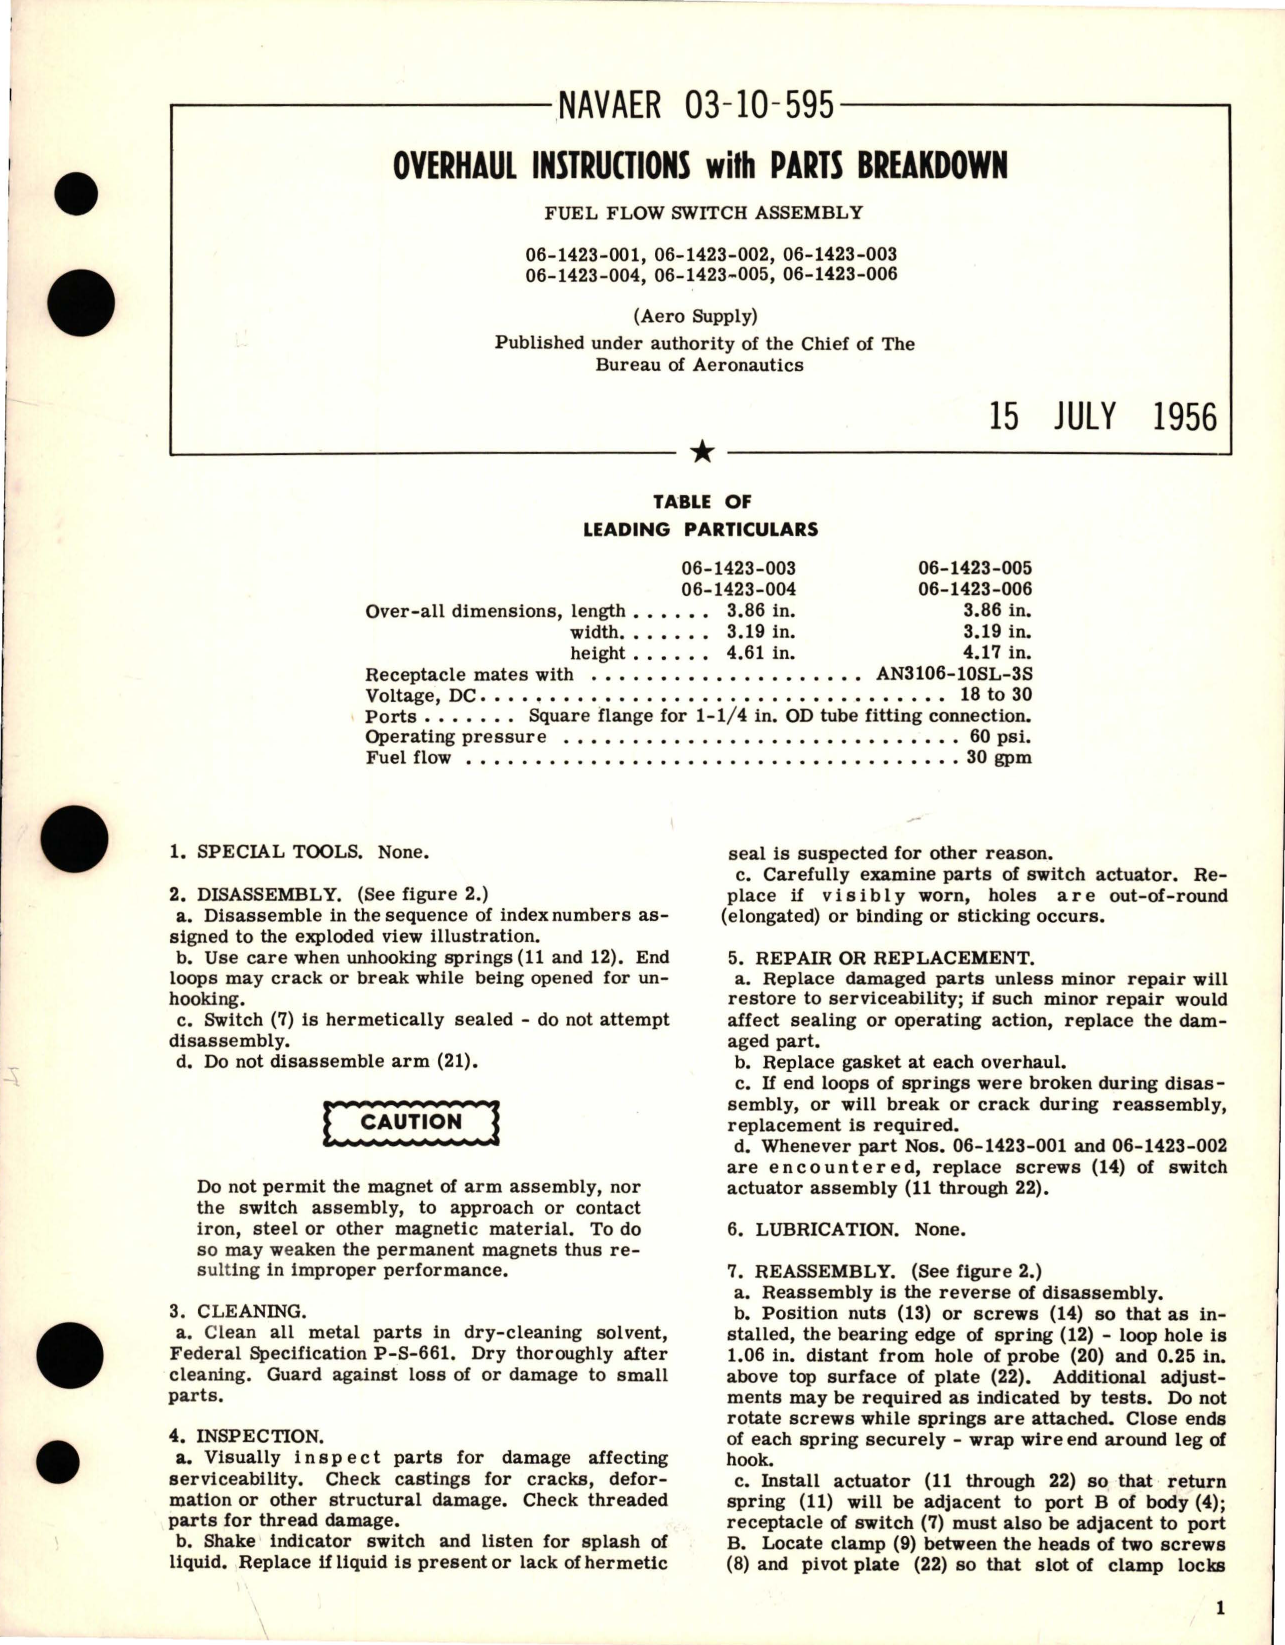 Sample page 1 from AirCorps Library document: Overhaul Instructions with Parts Breakdown for Fuel Flow Switch Assembly 